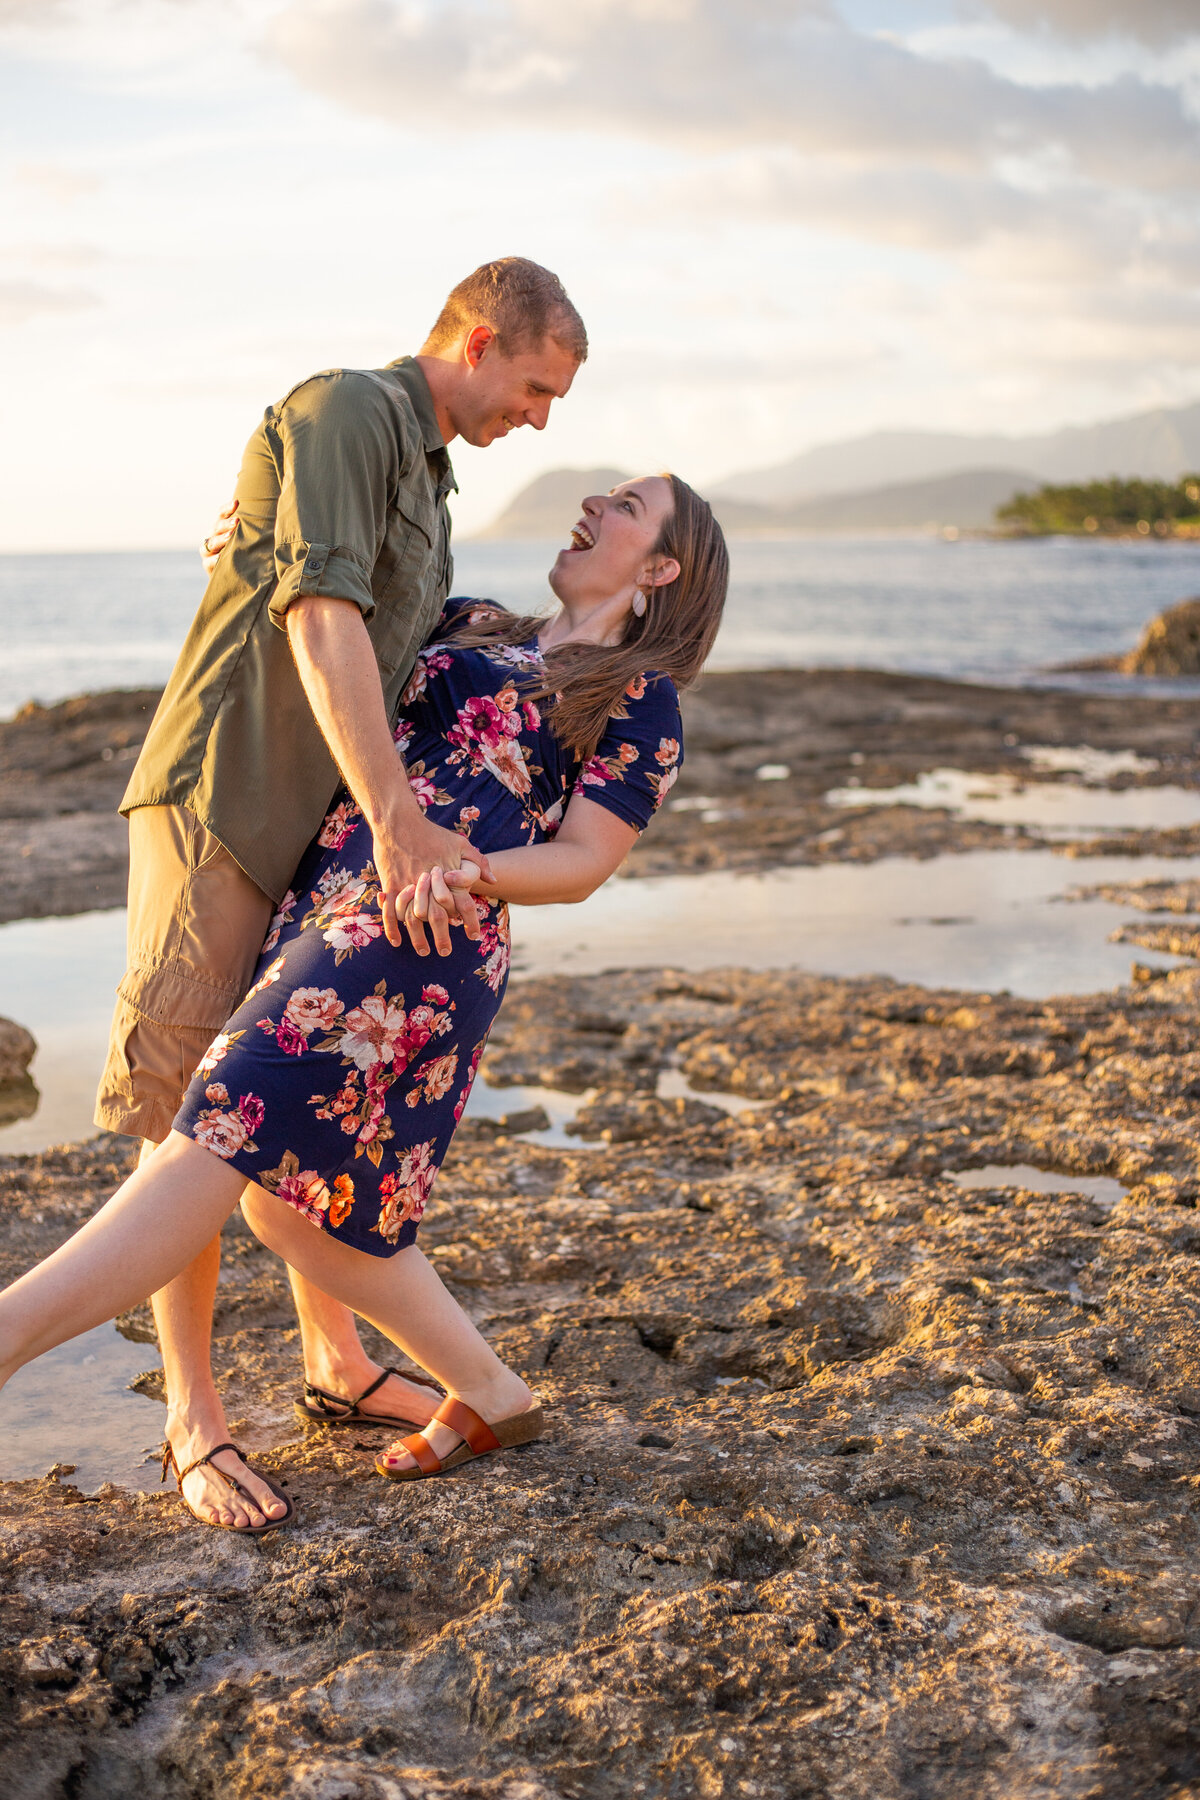 a smiling man dances with his wife on the beach as she laughs